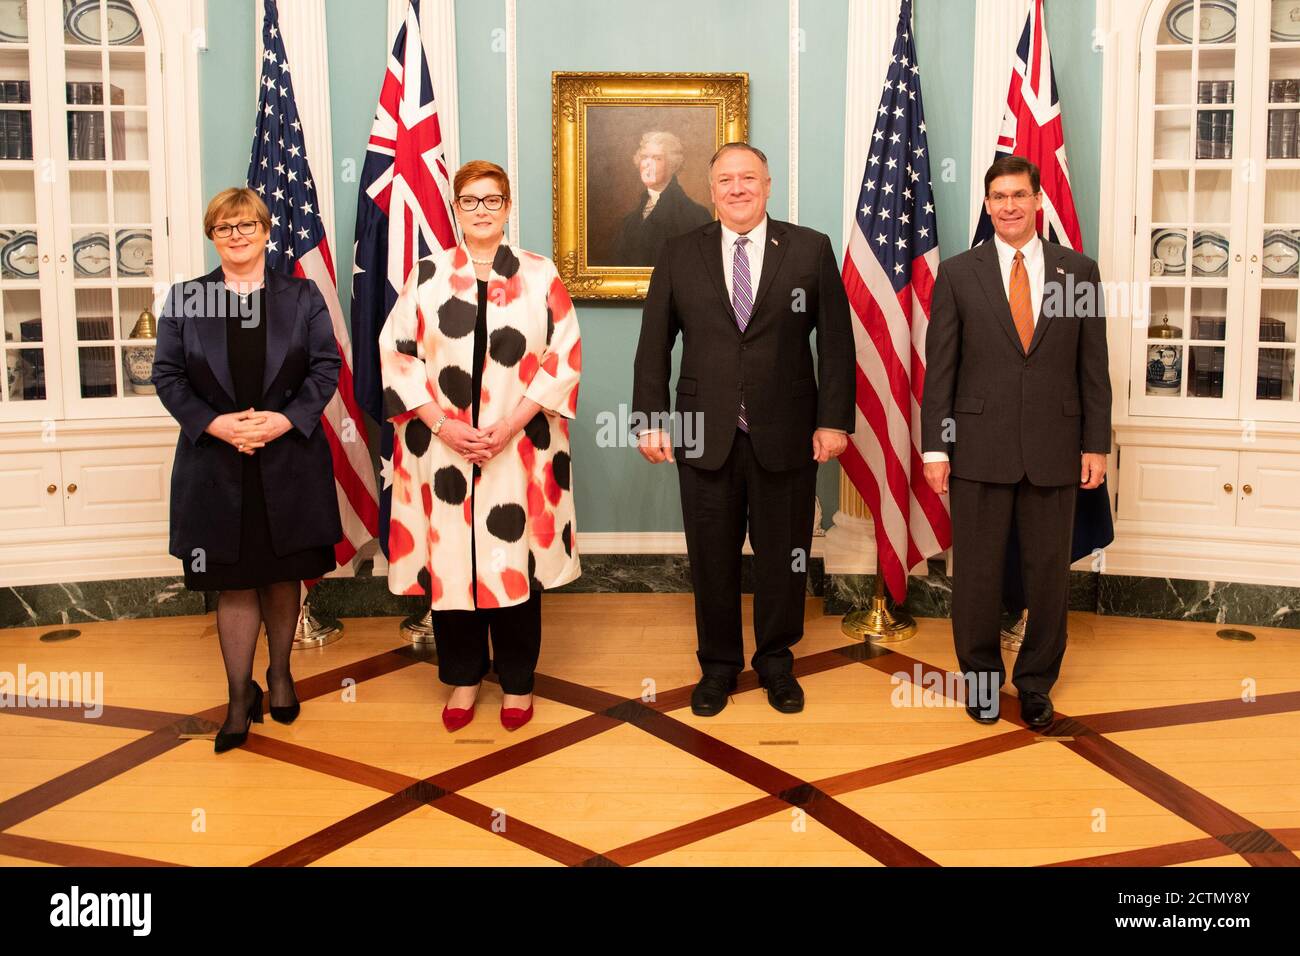 Secretary Pompeo and Secretary of Defense Mark Esper Take a Family Photo With Australian Foreign Minister Marise Payne and Australian Defence Minister Linda Reynolds . Secretary of State Michael R.  Pompeo and Secretary of Defense Mark Esper host Australian Foreign Minister Marise Payne and Australian Defence Minister Linda Reynolds for the 2020 AUSMIN Ministerial, at the Department of State, on July 28, 2020. Stock Photo